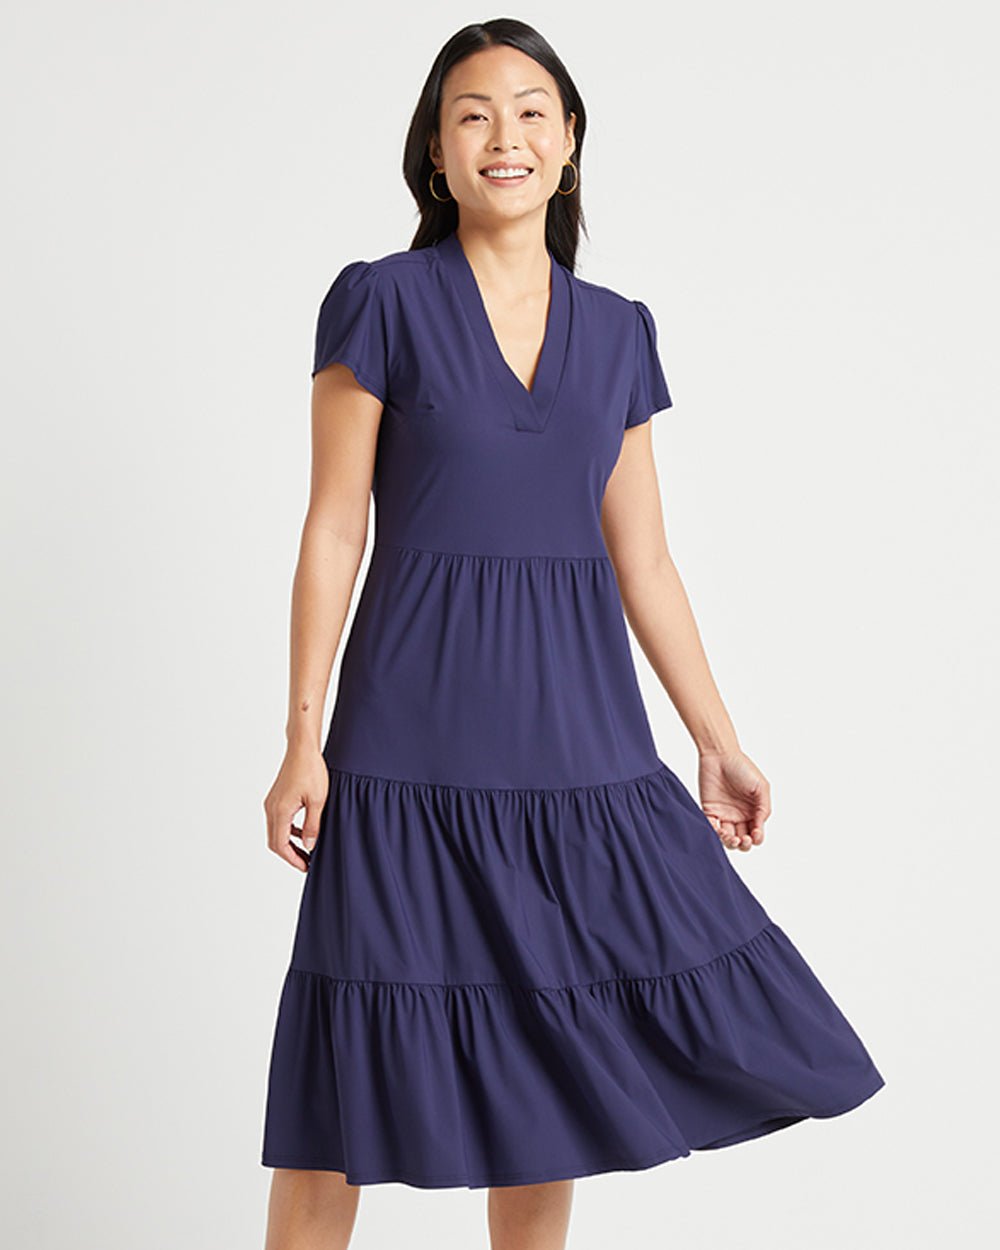 Jude Connally - Libby Dress Jude Cloth - Navy - Shorely Chic Boutique